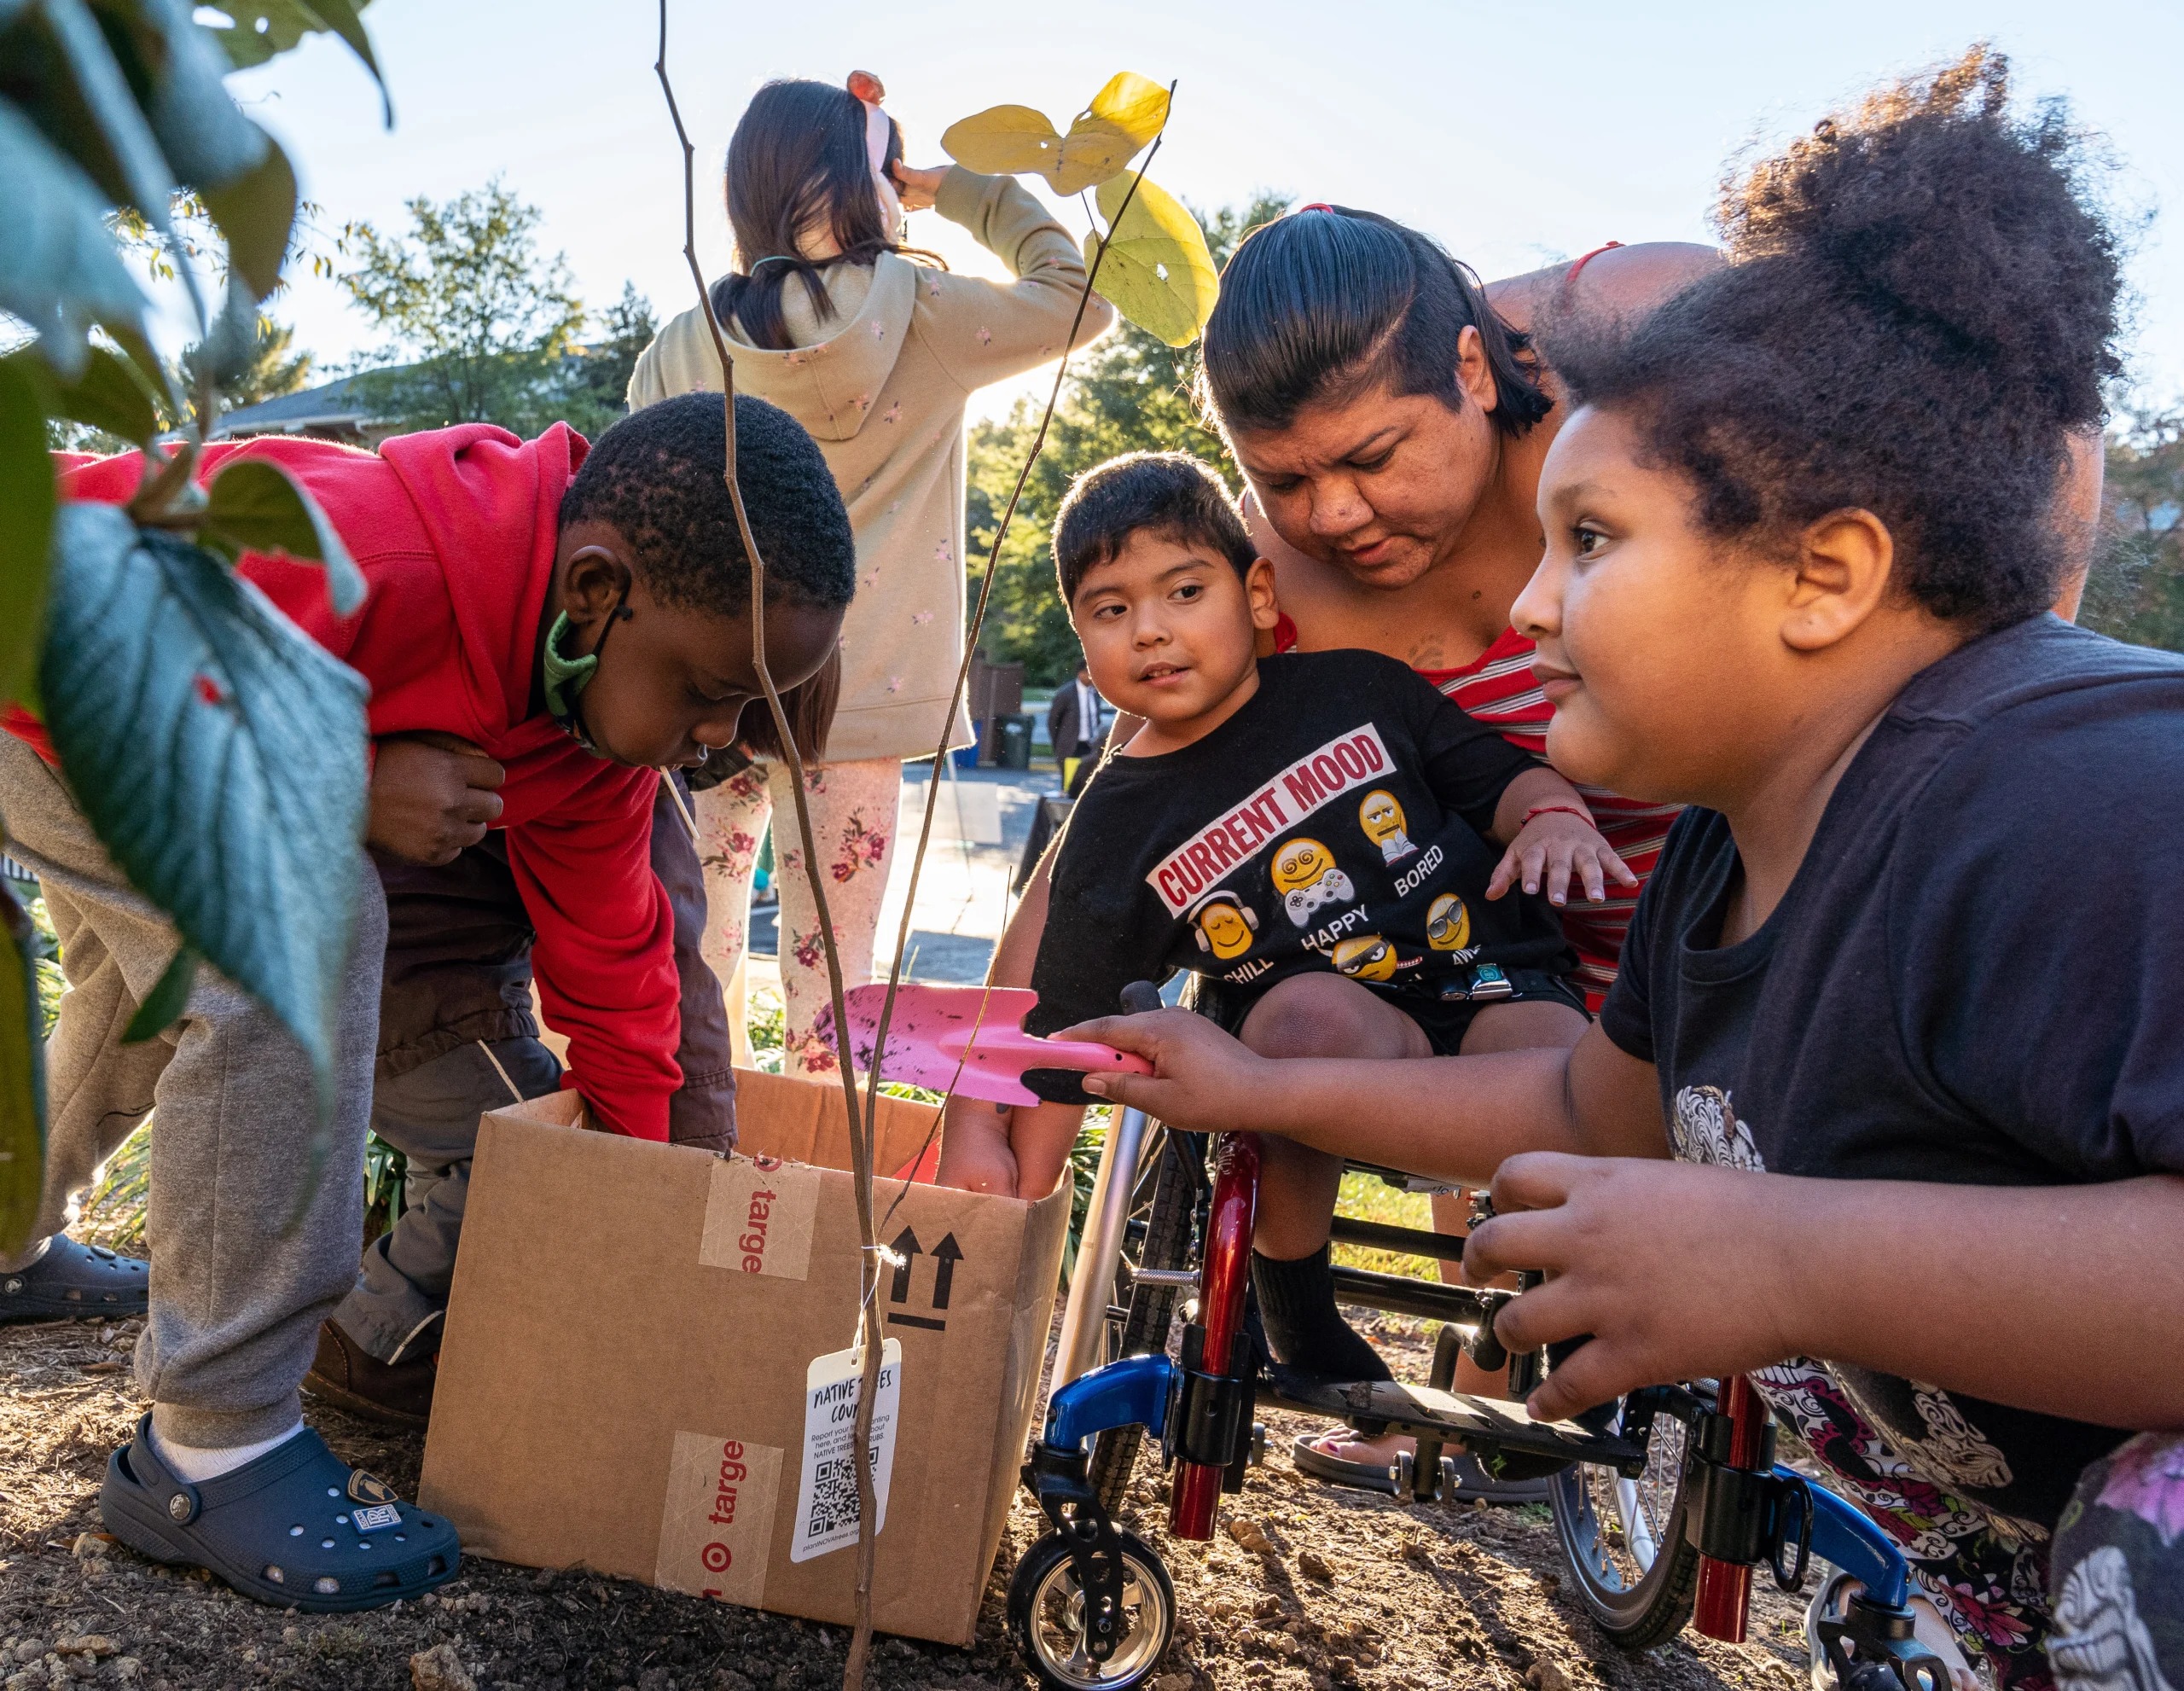 4 people are working together to plant a small tree. A young Black boy leans into a cardboard box with soil. A Latina girl is holding a small pink trowel. A young Latino boy in a wheelchair leans in to get a good look, while a woman bends in behind him.